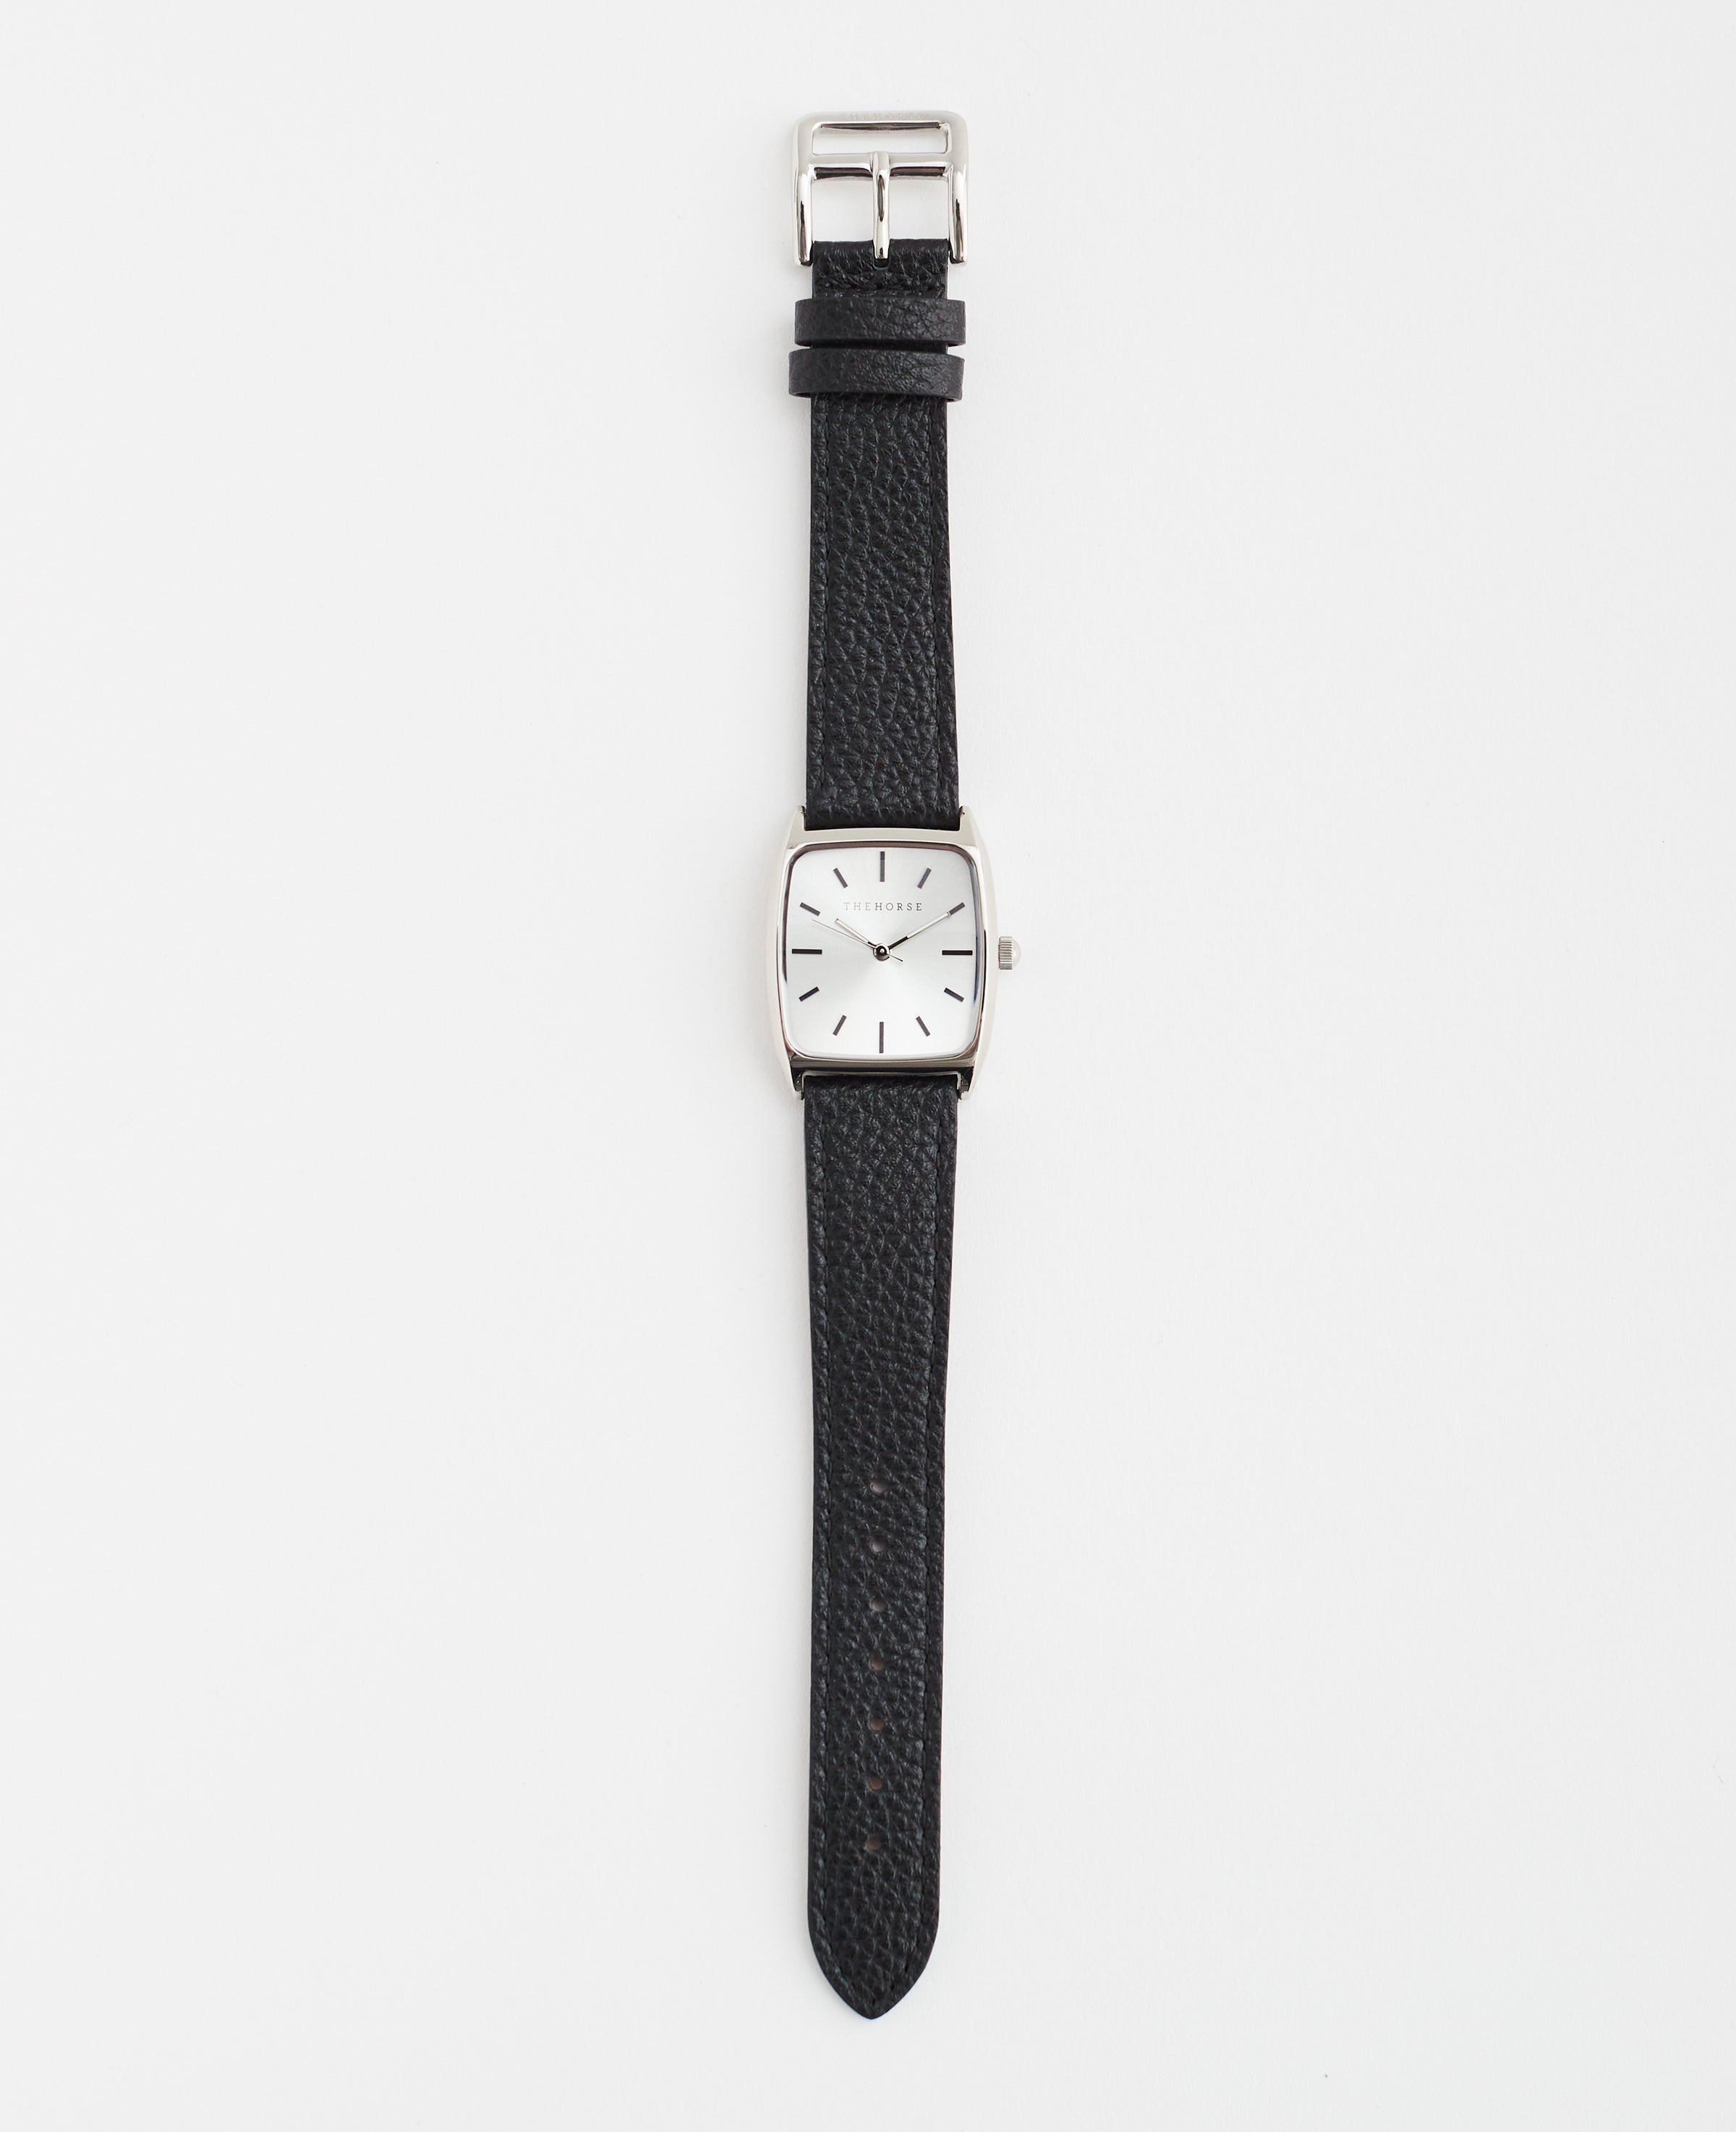 The Dress Watch: Polished Silver Case / Sunray Dial / Black Leather Strap by The Horse®